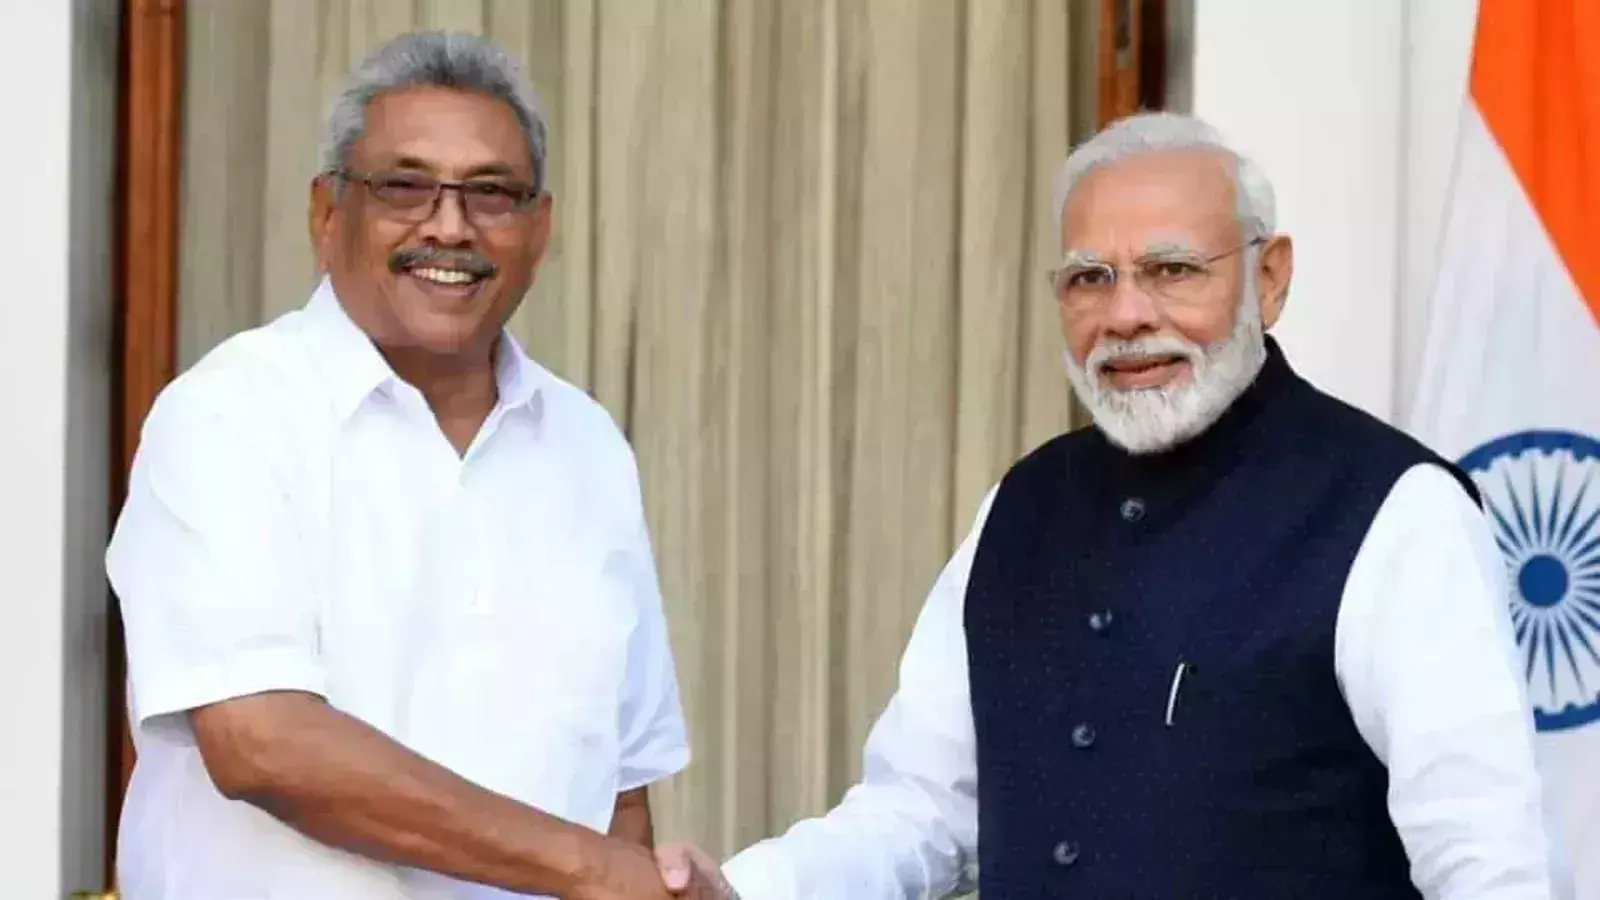 PM Modi pressured Gotabaya to give a project to Adani: Lankan official